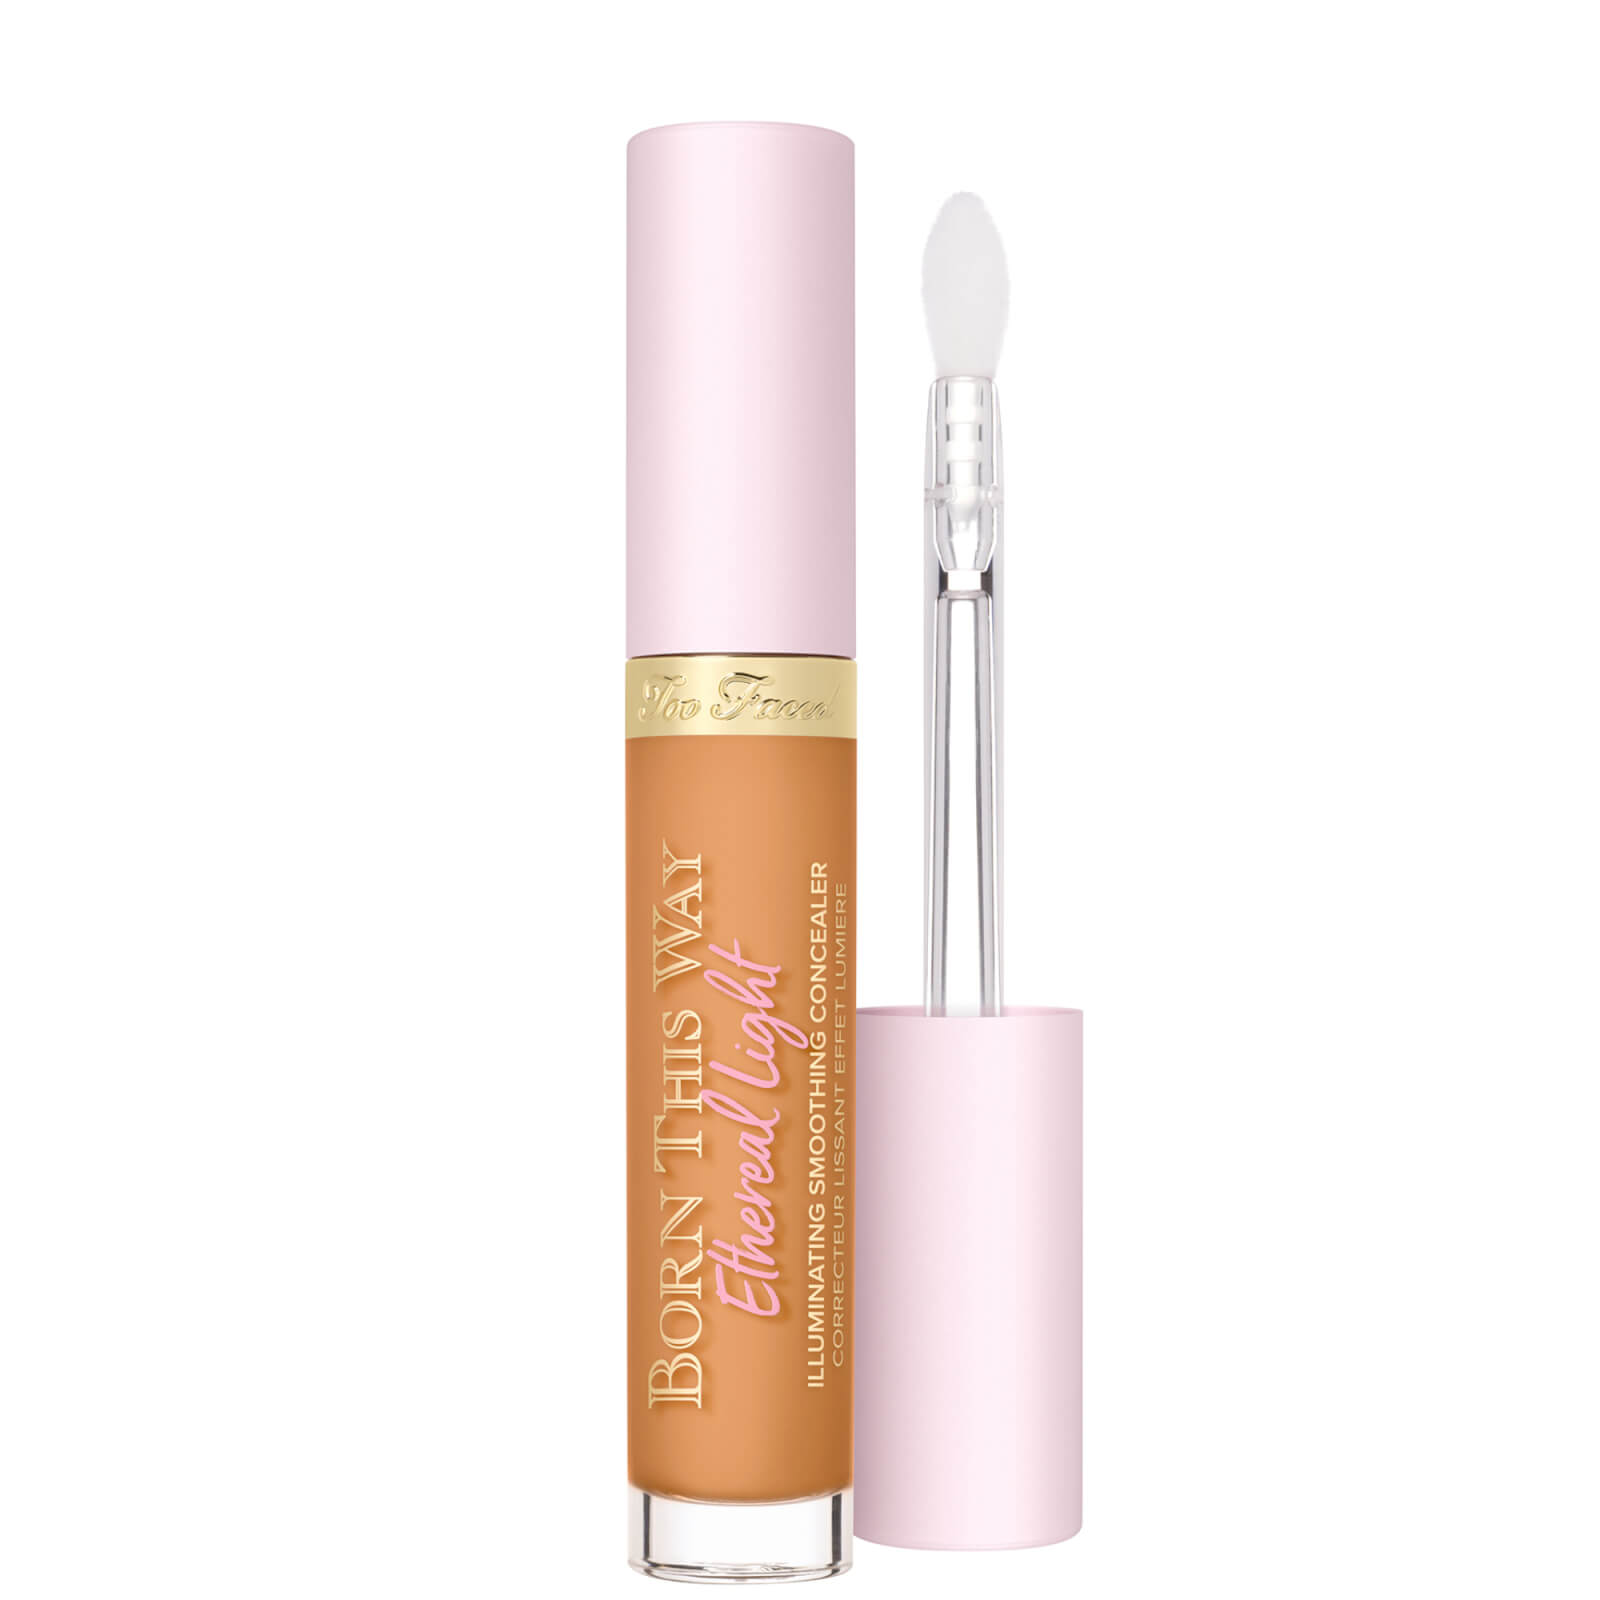 Too Faced Born This Way Ethereal Light Illuminating Smoothing Concealer 15ml (Various Shades) - Gingersnap